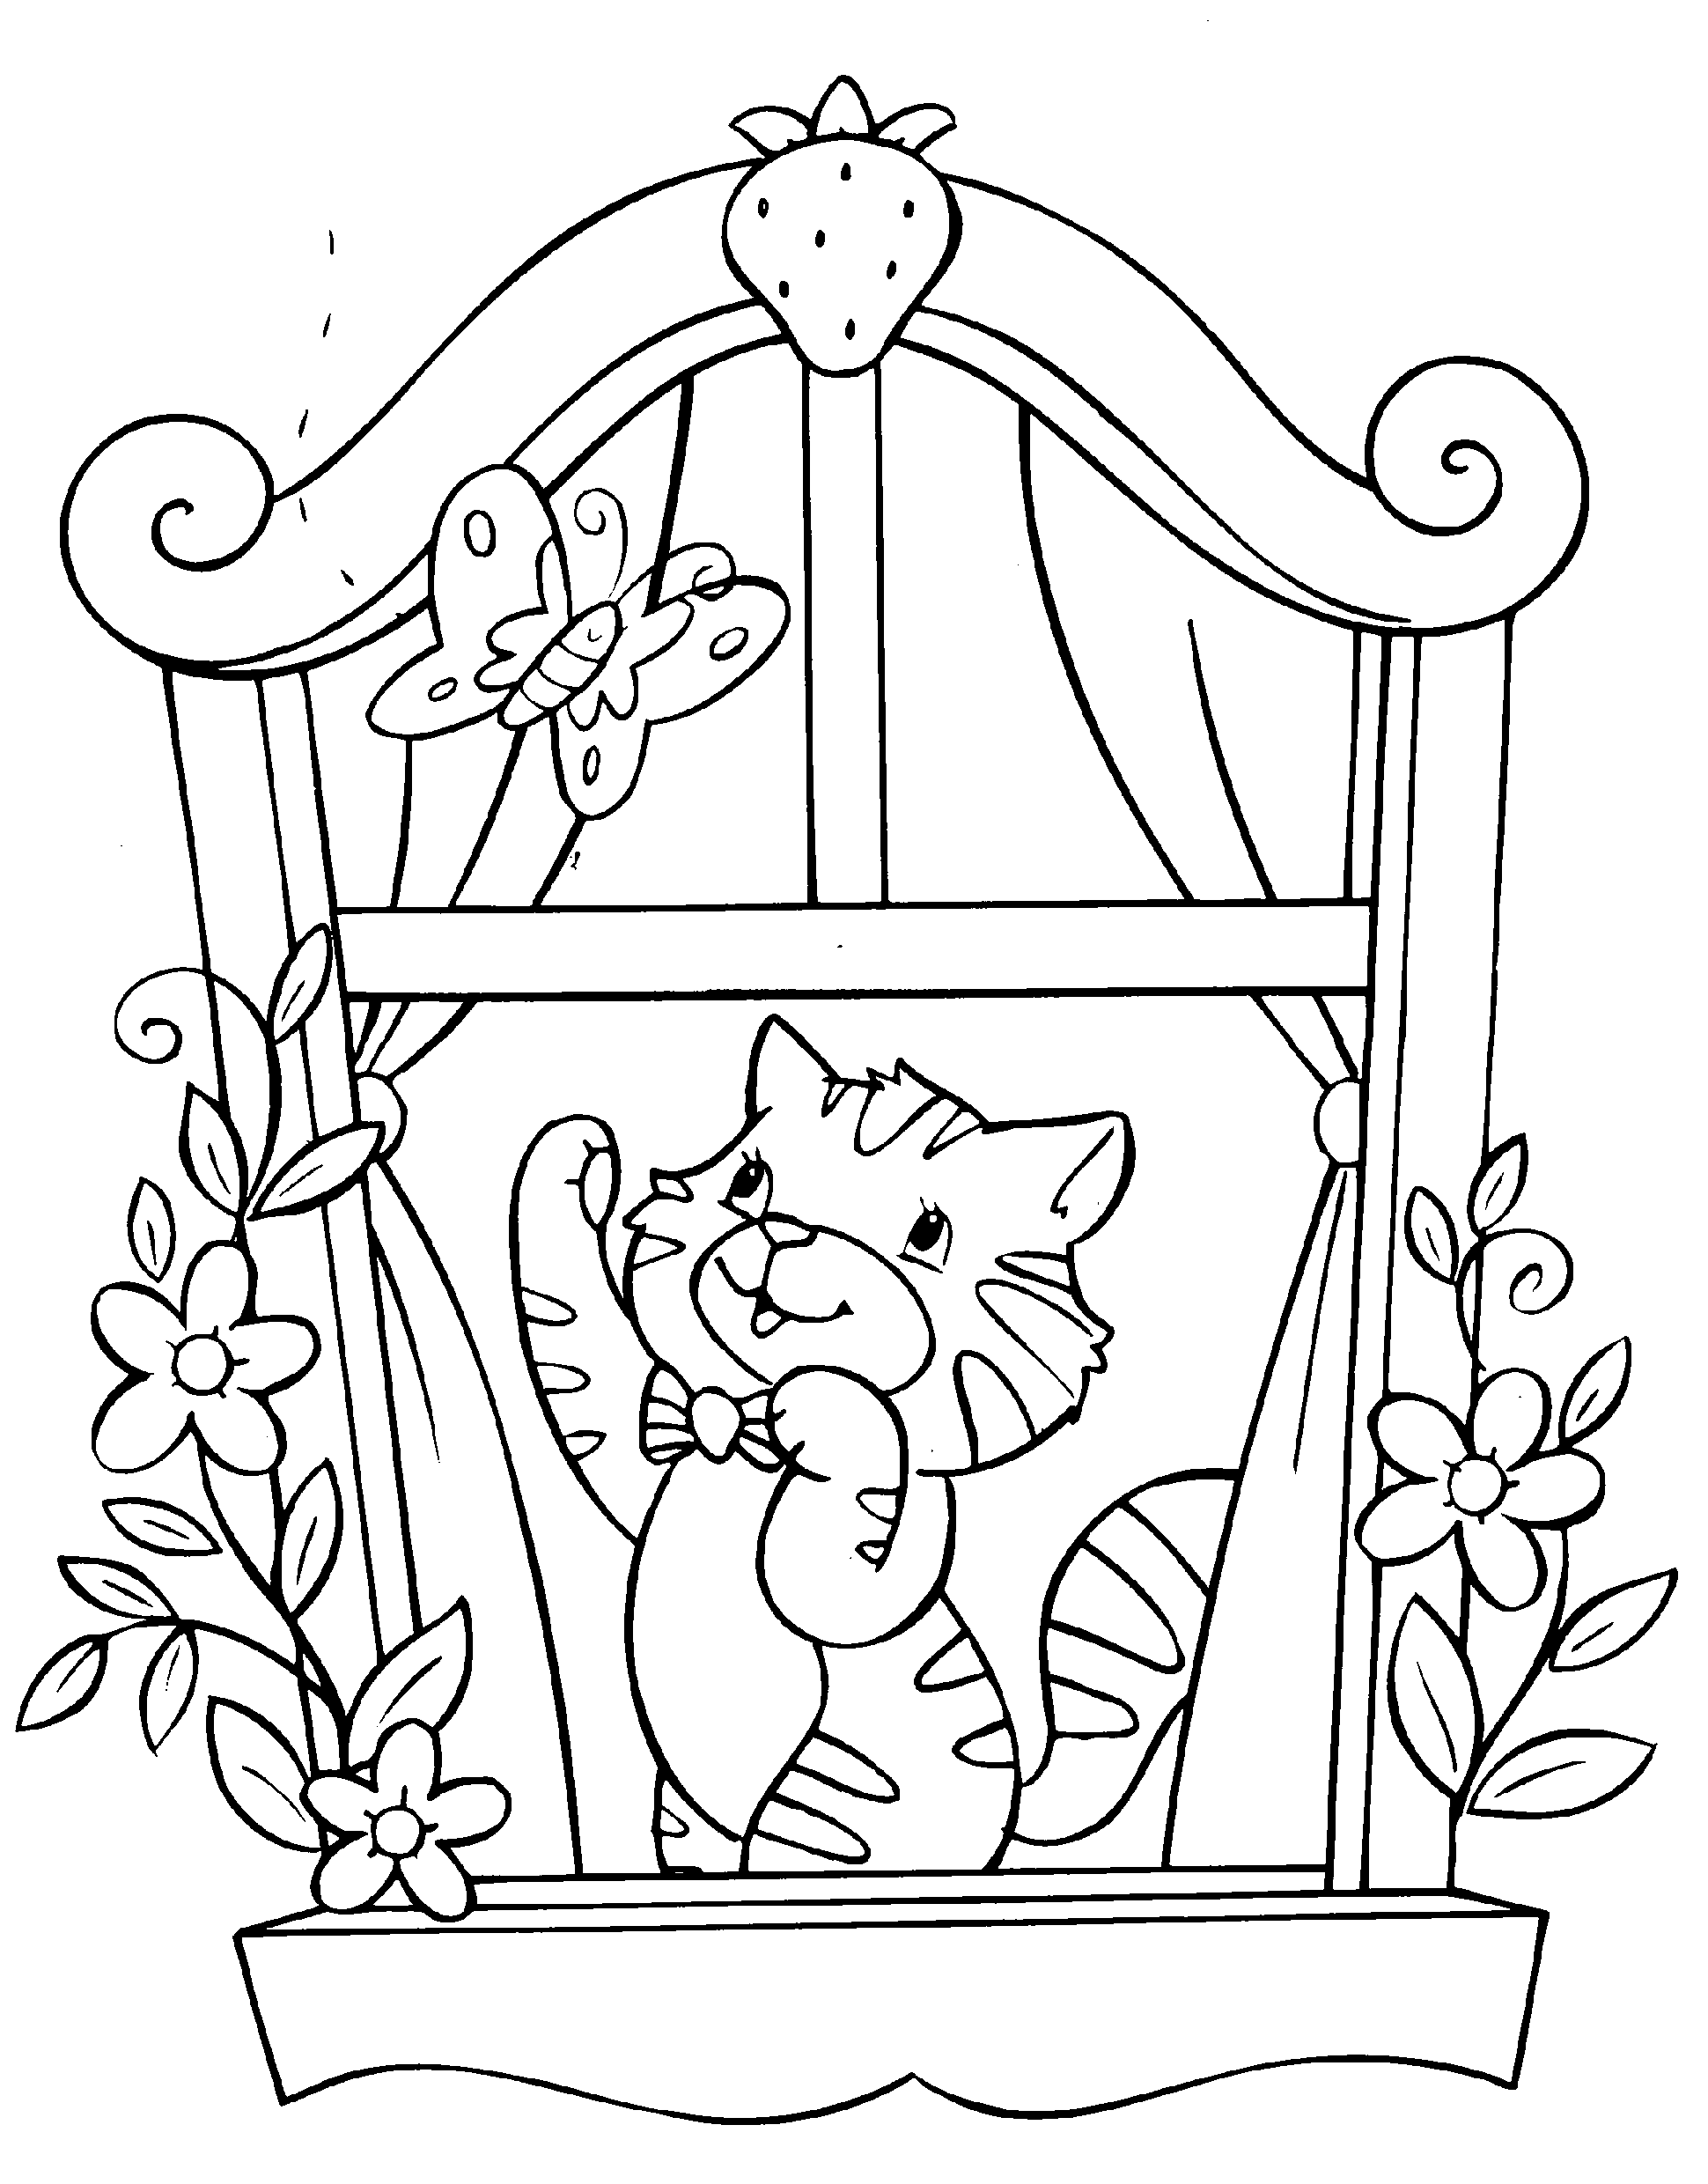 Kitten And Butterfly coloring page